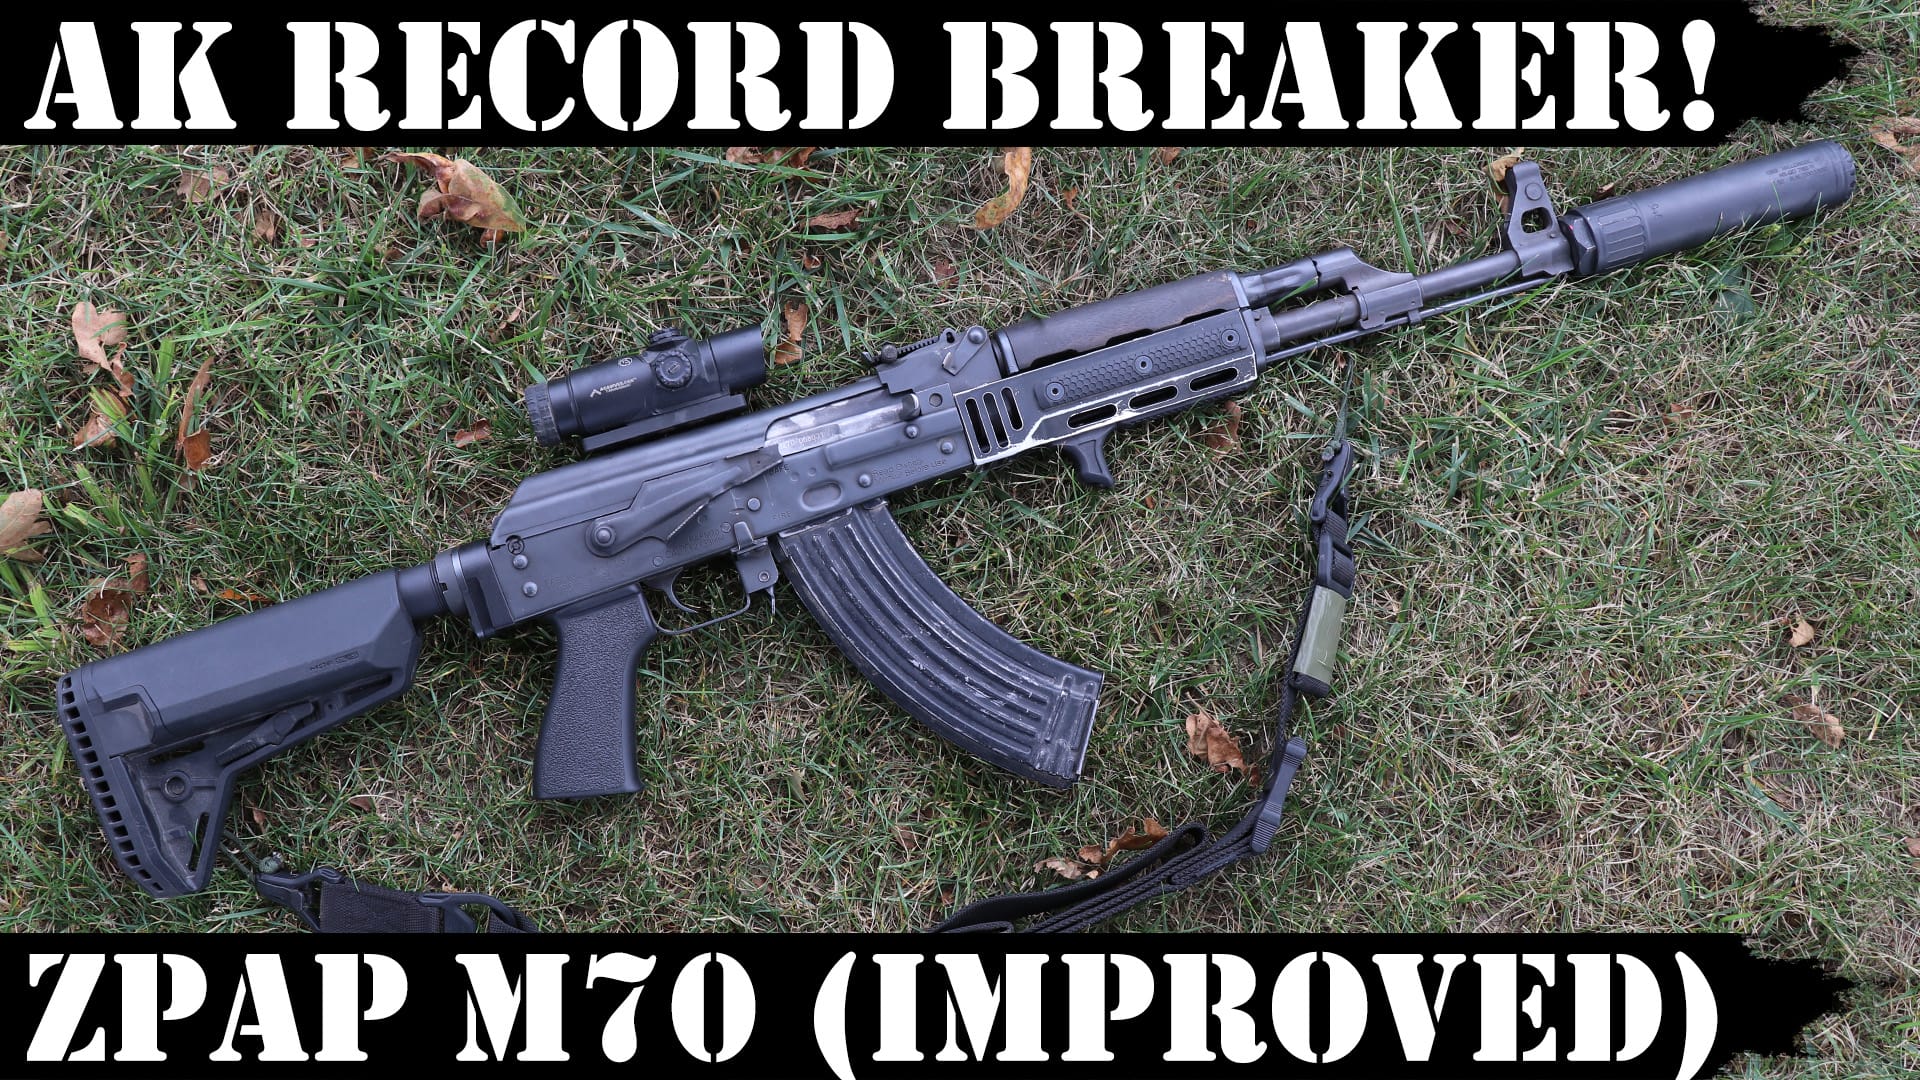 AK Record Breaker! ZPAP M70 (Improved) – 4,000 Rounds!